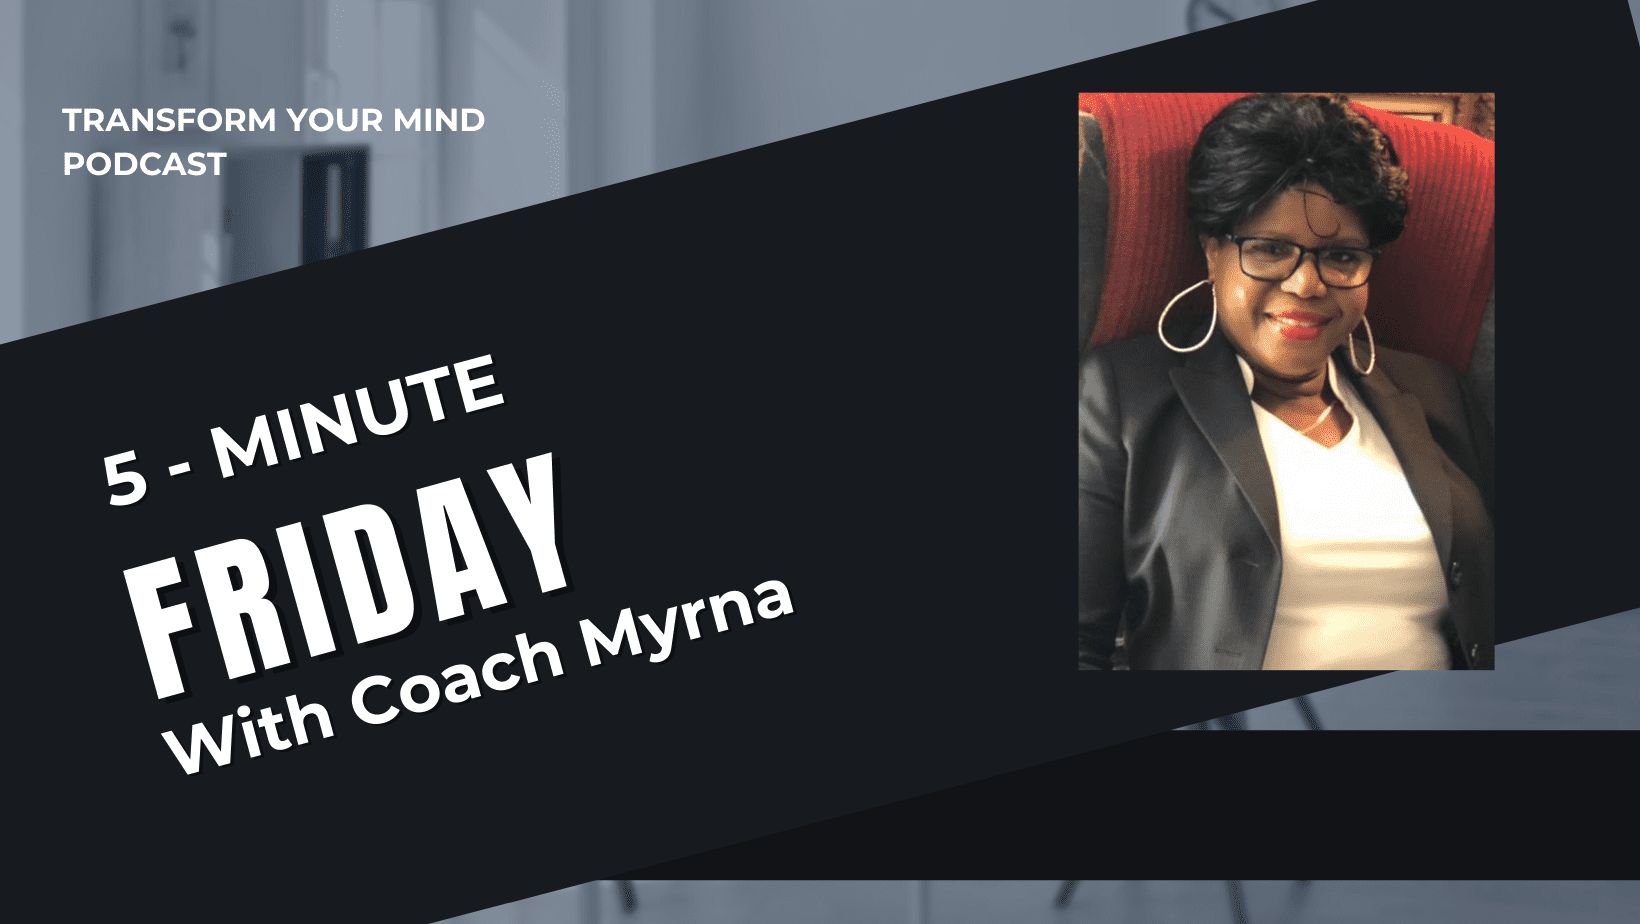 Coach Myrna 5 min something greater is coming